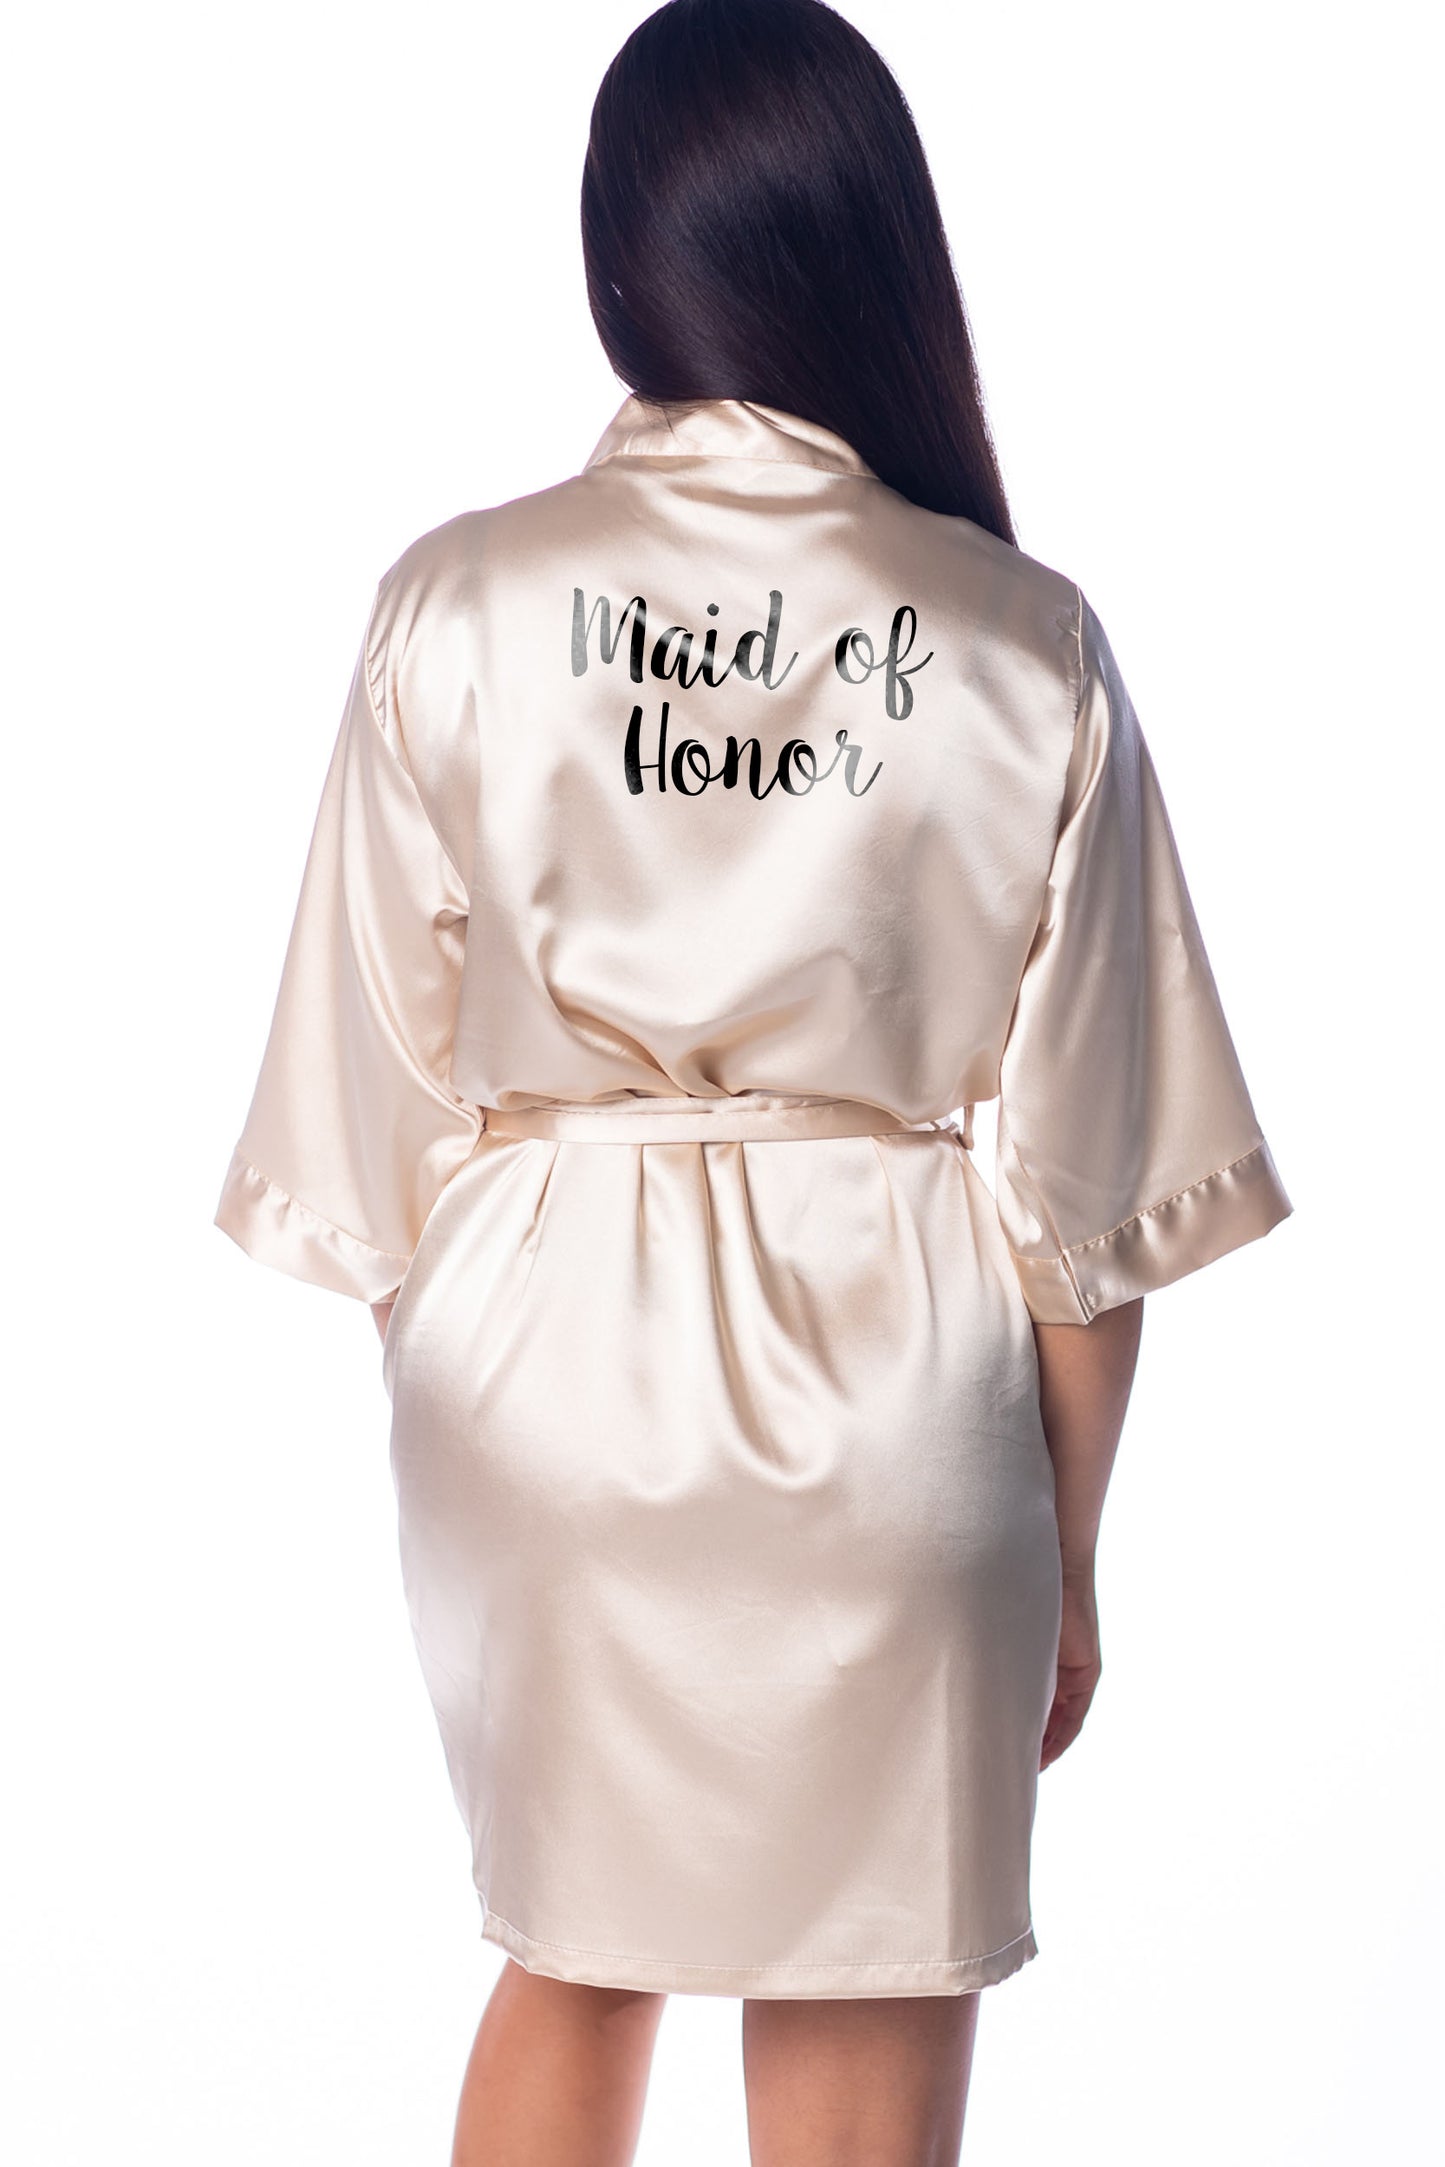 L/XL "Maid of Honor" Champagne Satin Robe - Sweetpea in Black (Clearance Item)